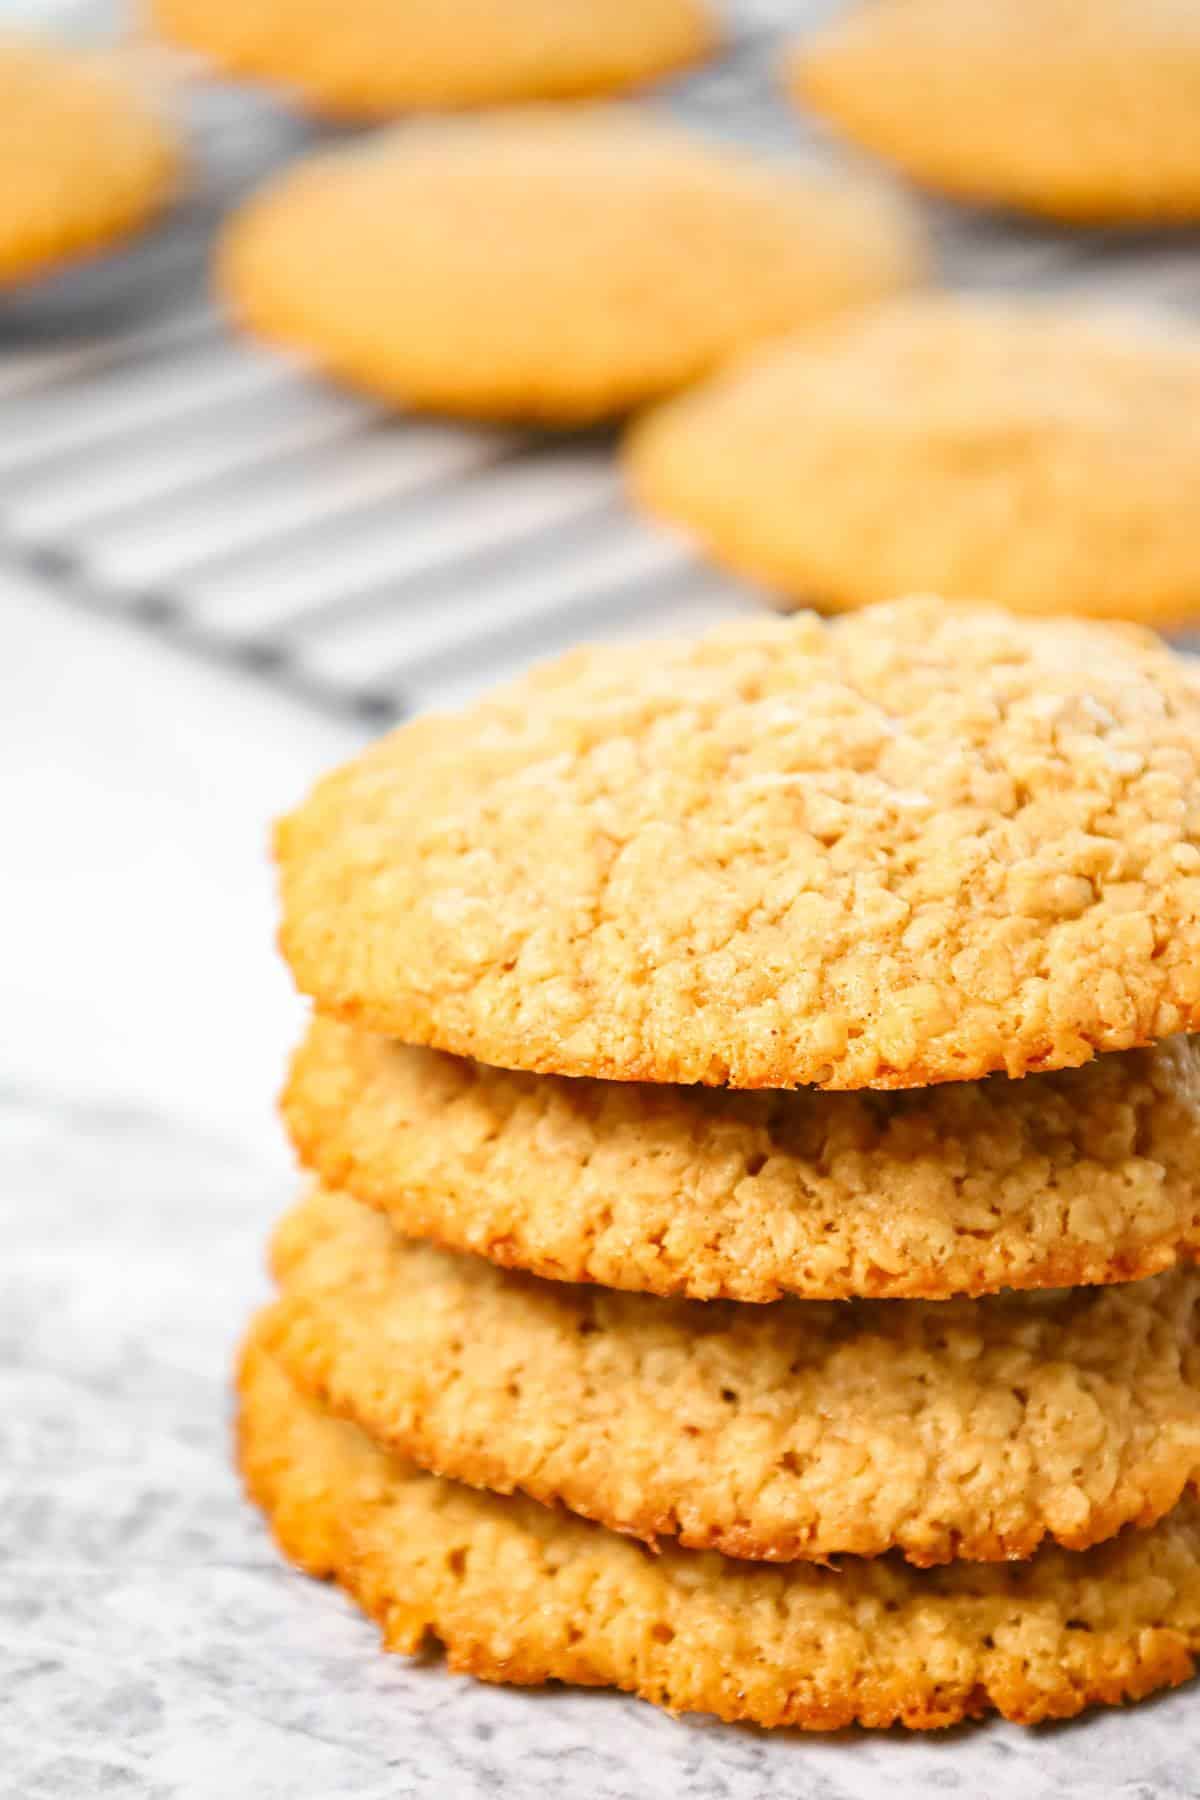 Peanut Butter Oatmeal Cookies are a delicious soft and chewy cookie recipe made with smooth peanut butter and quick oats.